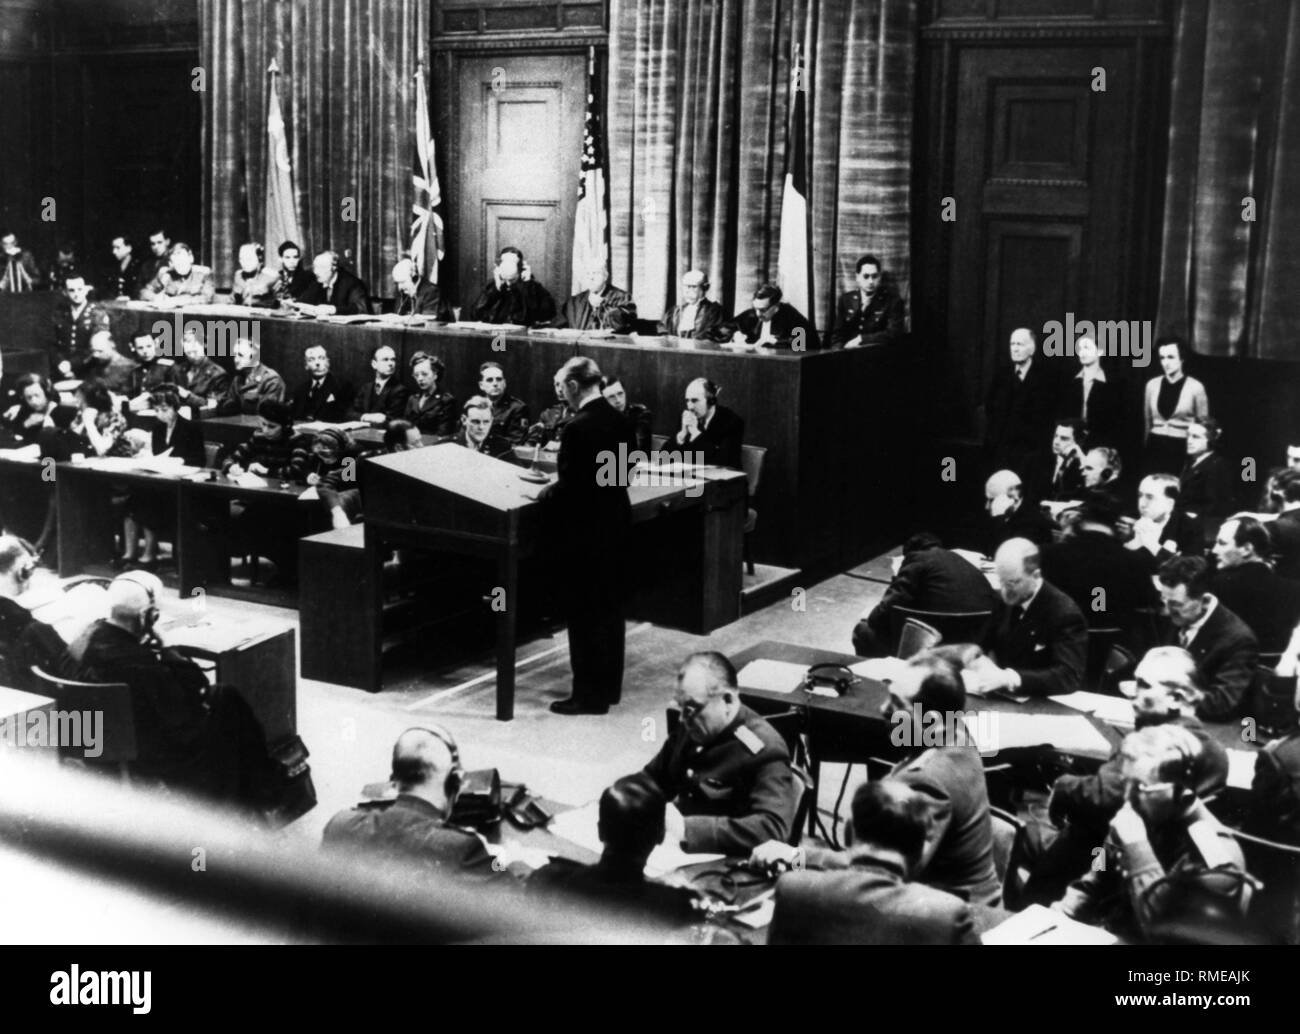 The courtroom of the Nuremberg Palace of Justice and the prosecutors during the Nuremberg war crimes trial. On the judge's tribune (background in front of the flags) from left: A.F. Volchkov, representative of the USSR, I.T. Nikitschenko, judge of the USSR, Sir Norman Birkett, Judge of the United Kingdom, Sir Geoffrey Lawrence, Presiding Judge of Great Britain, Francis Biddle, Judge of the USA, John J. Parker, Representative of the United States, Henry Dennedieu des Vabres, Judge of France, Robert Falco, Representative of France. Stock Photo